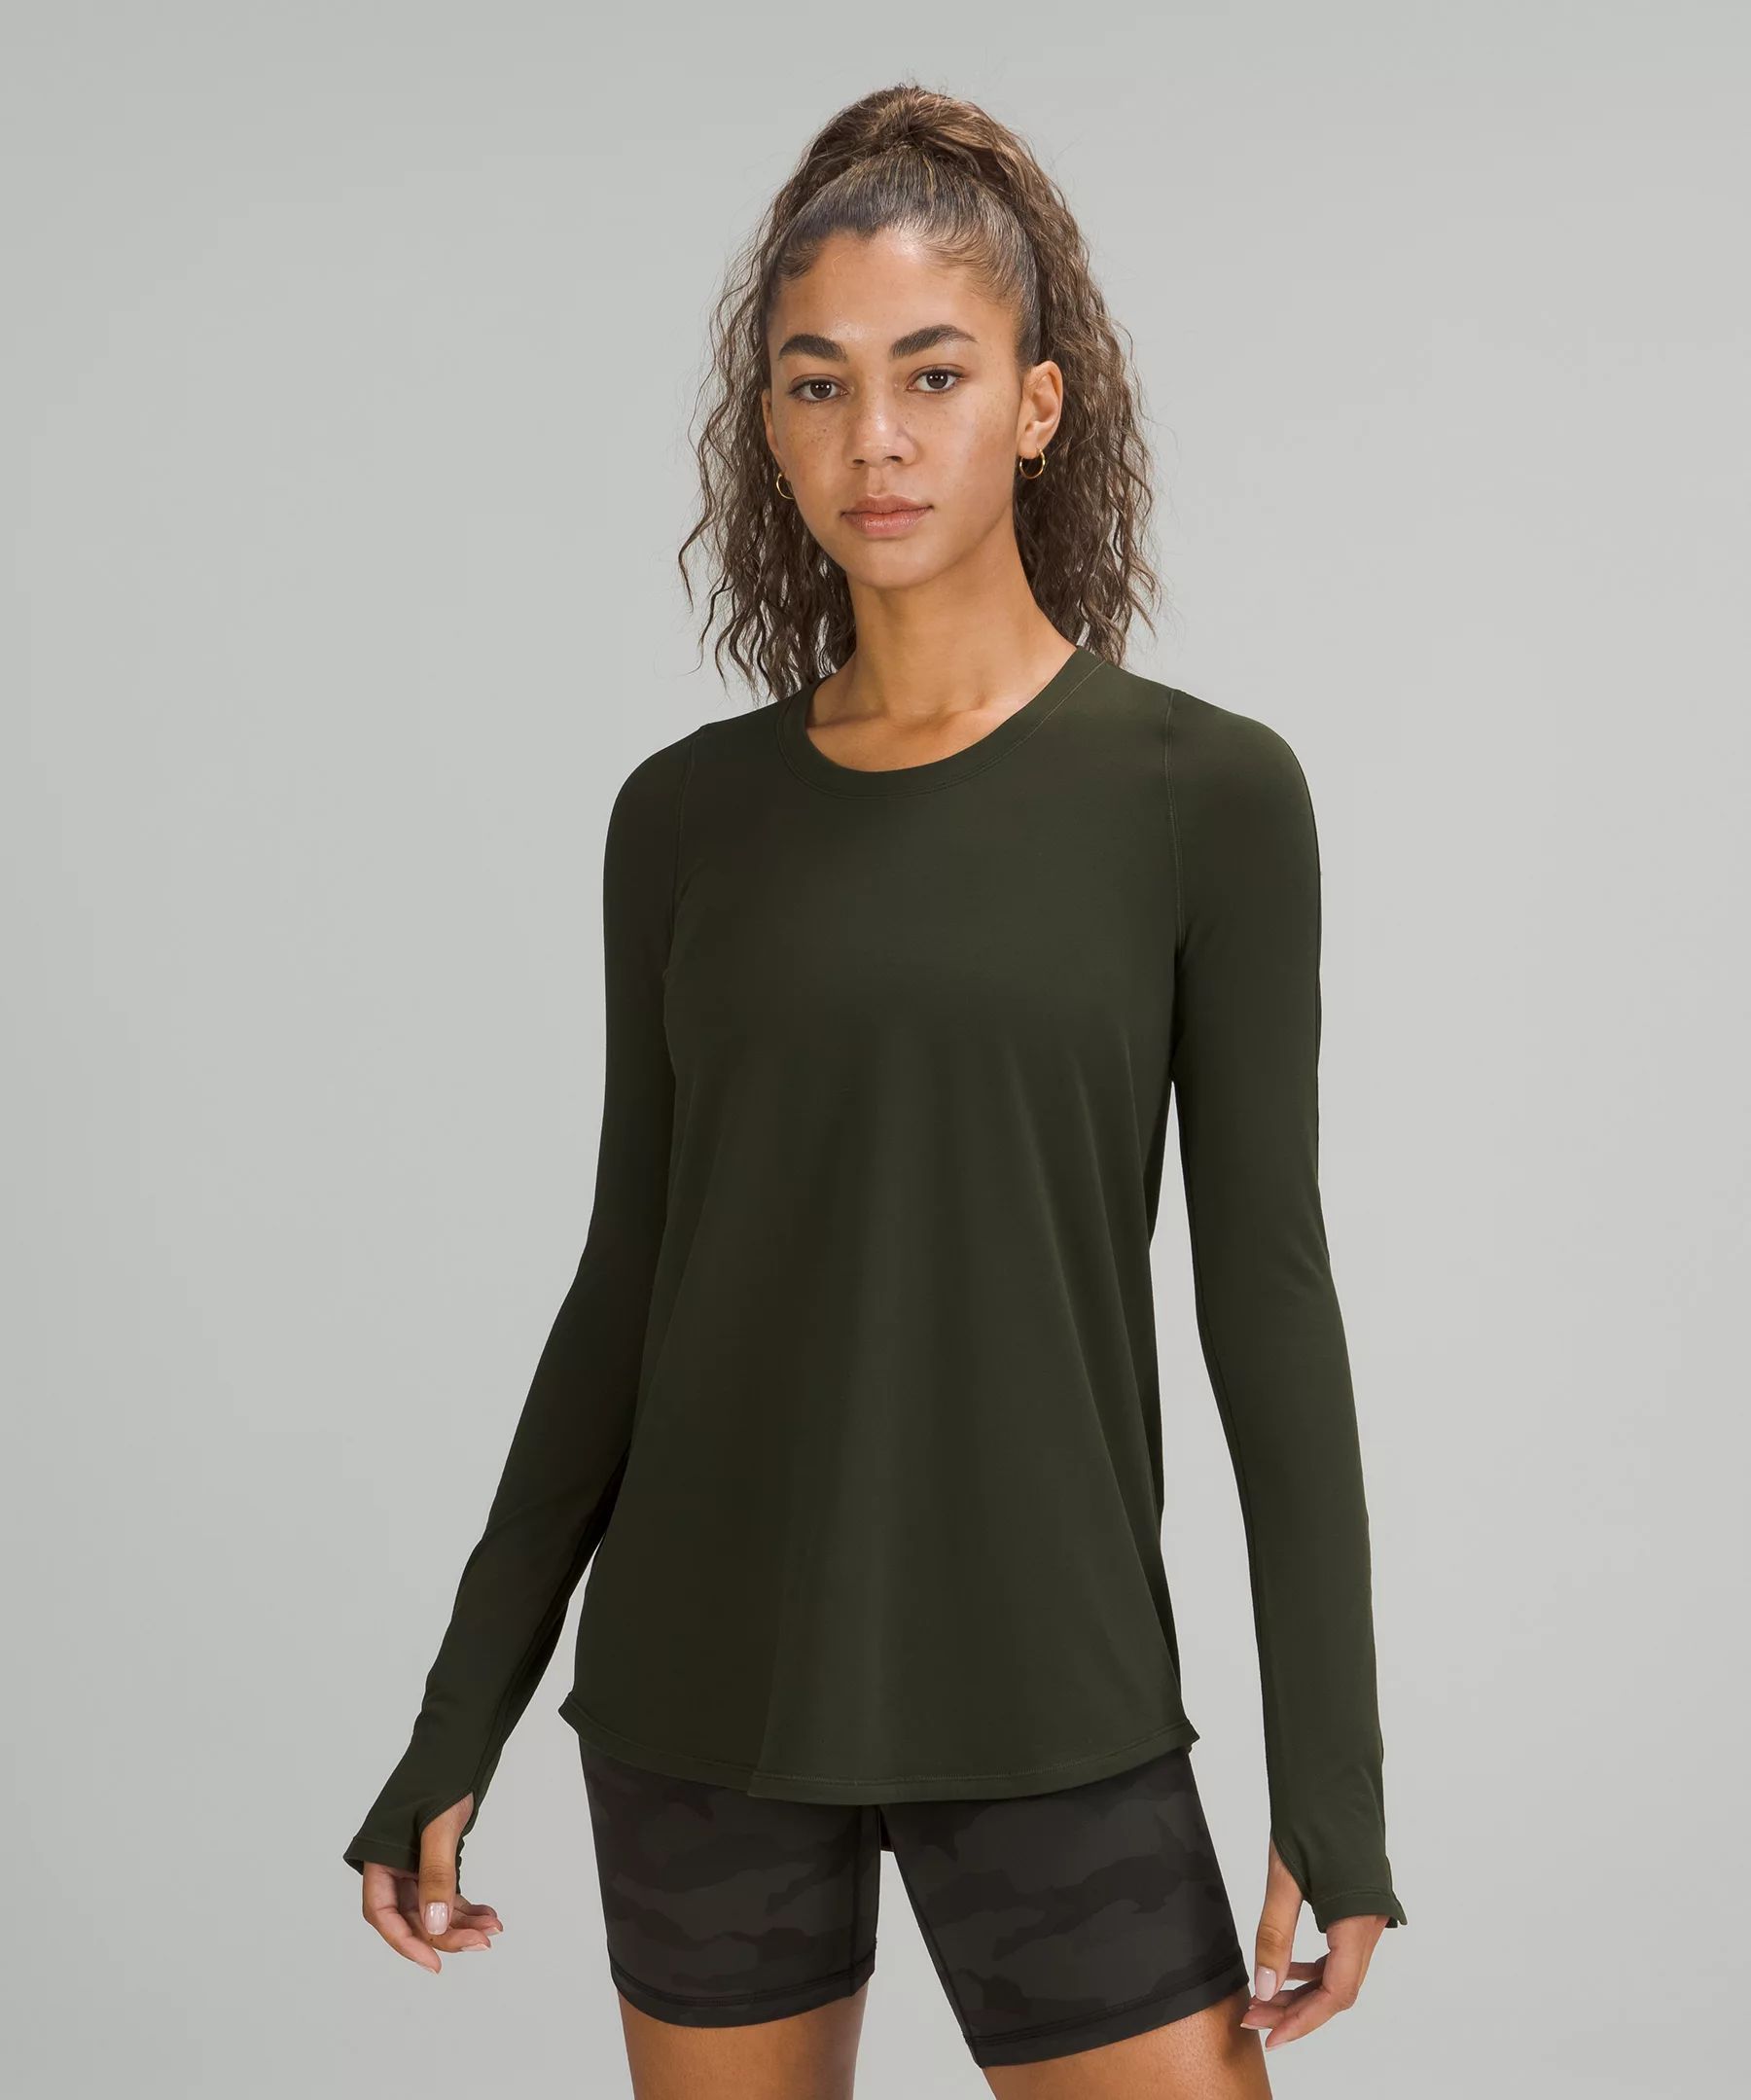 Tuck and Flow Long Sleeve Shirt Online Only | Lululemon (US)